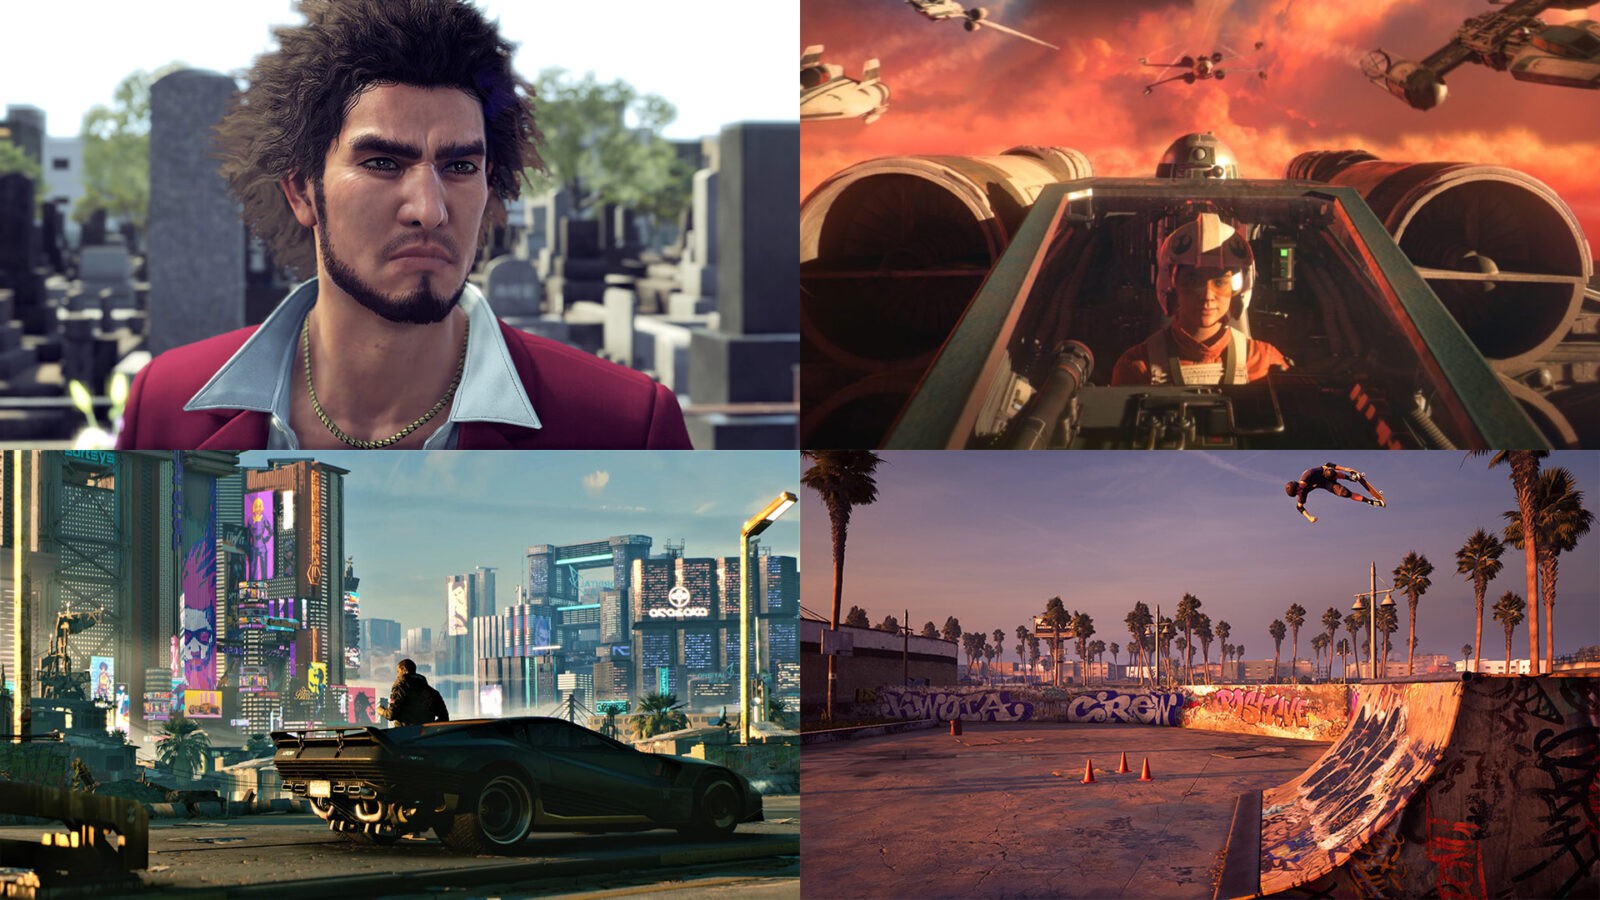 My Most Wanted Games for the End of 2020